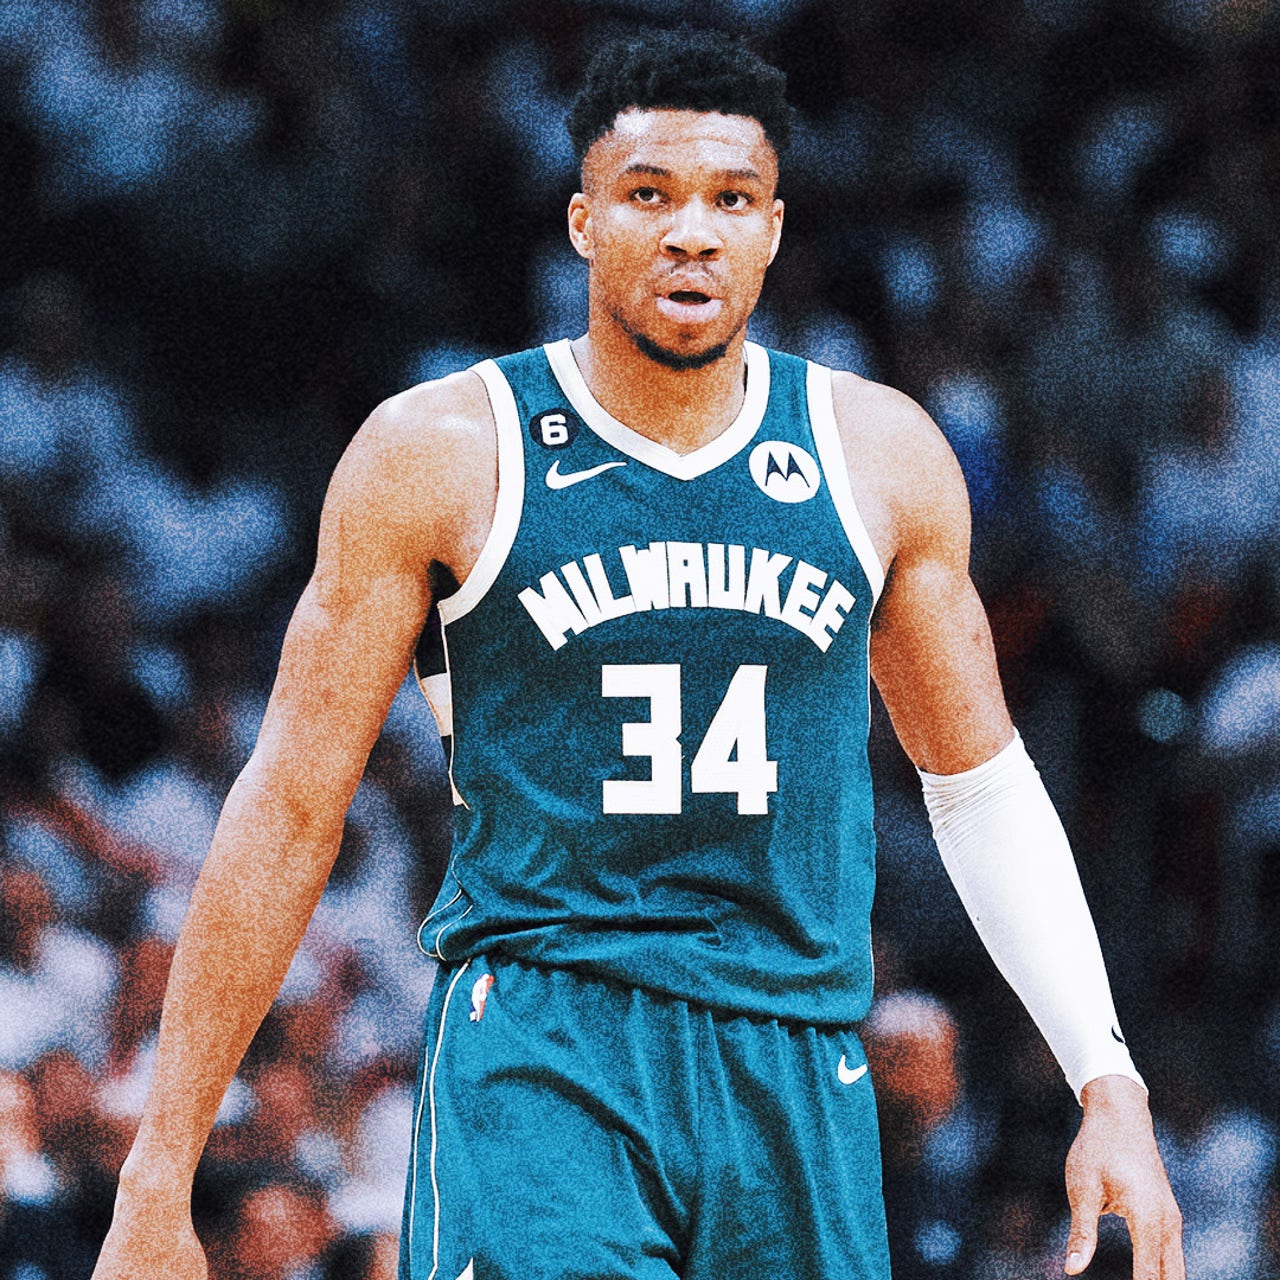 Milwaukee Buck Giannis Antetokounmpo is ready to play with the Greece  National team this summer!